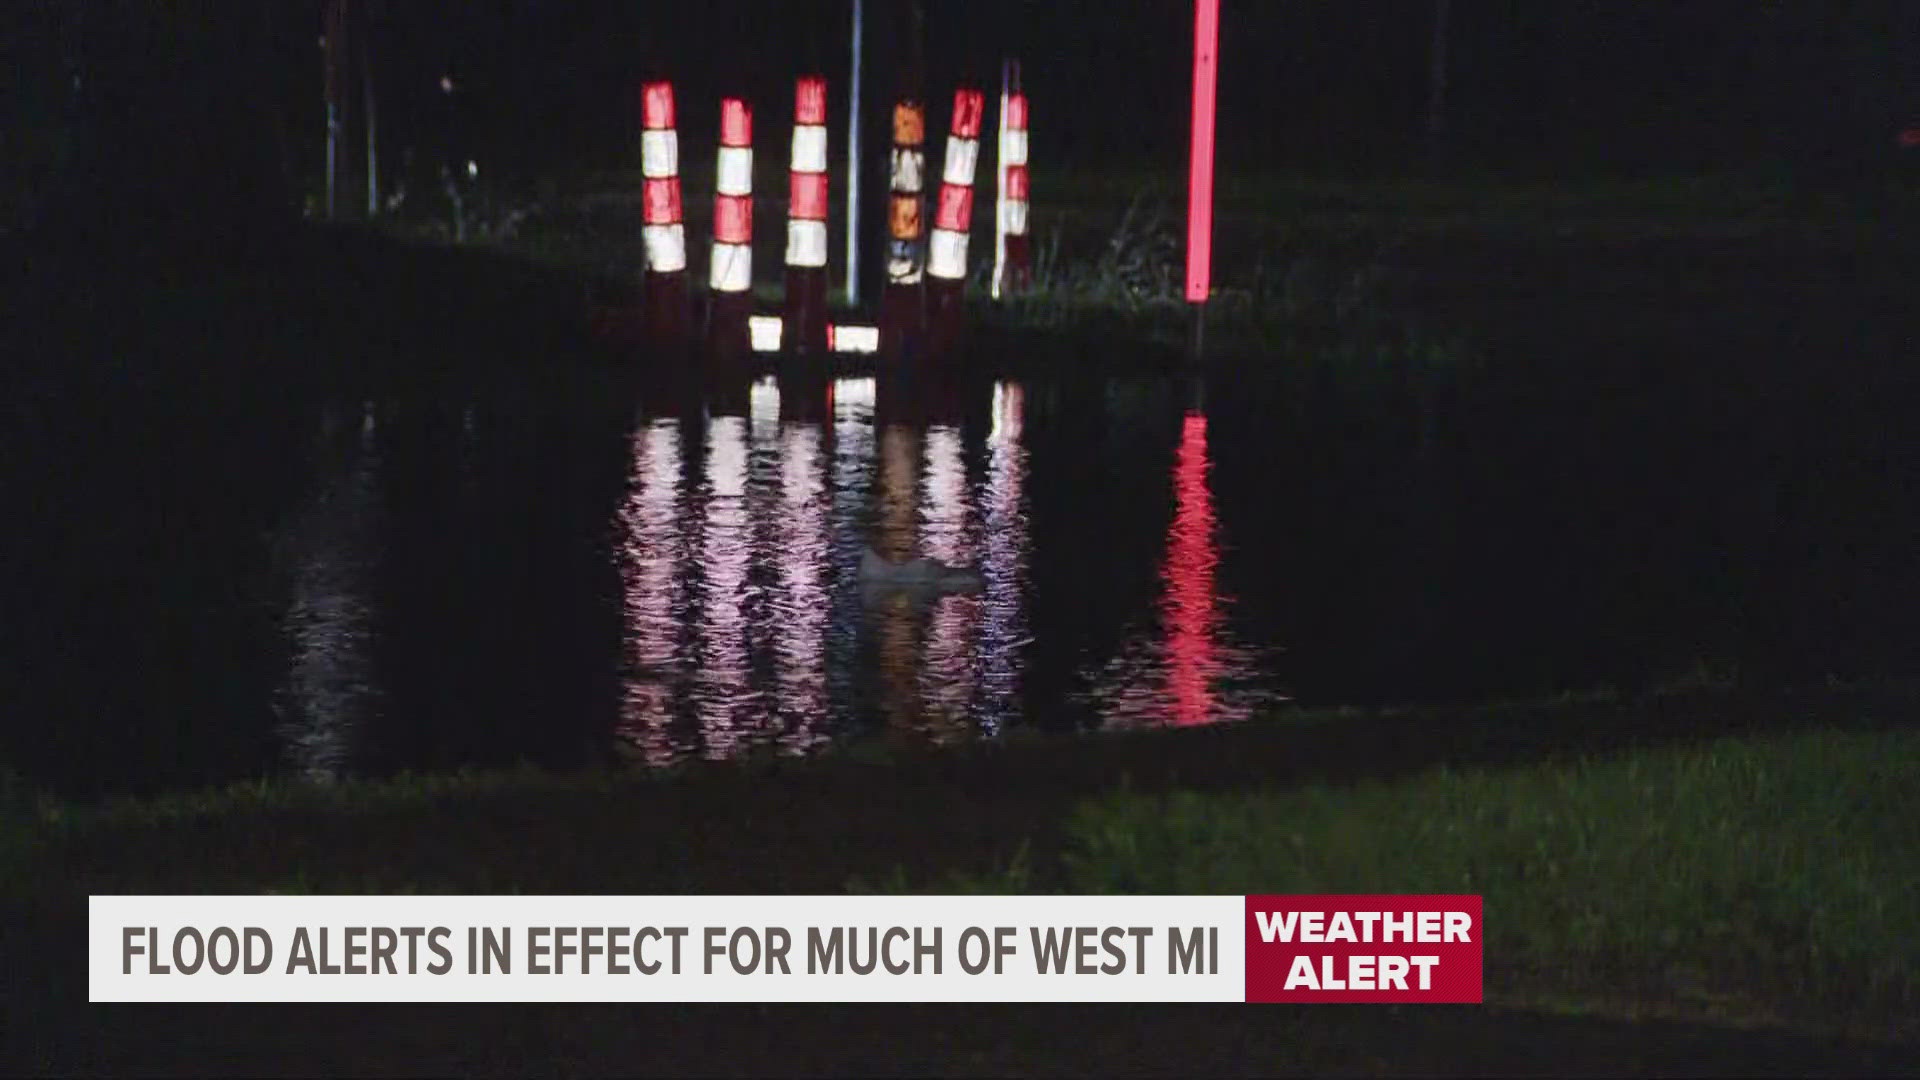 Heavy rainfall is causing some flooding in West Michigan, especially in the Kalamazoo area.